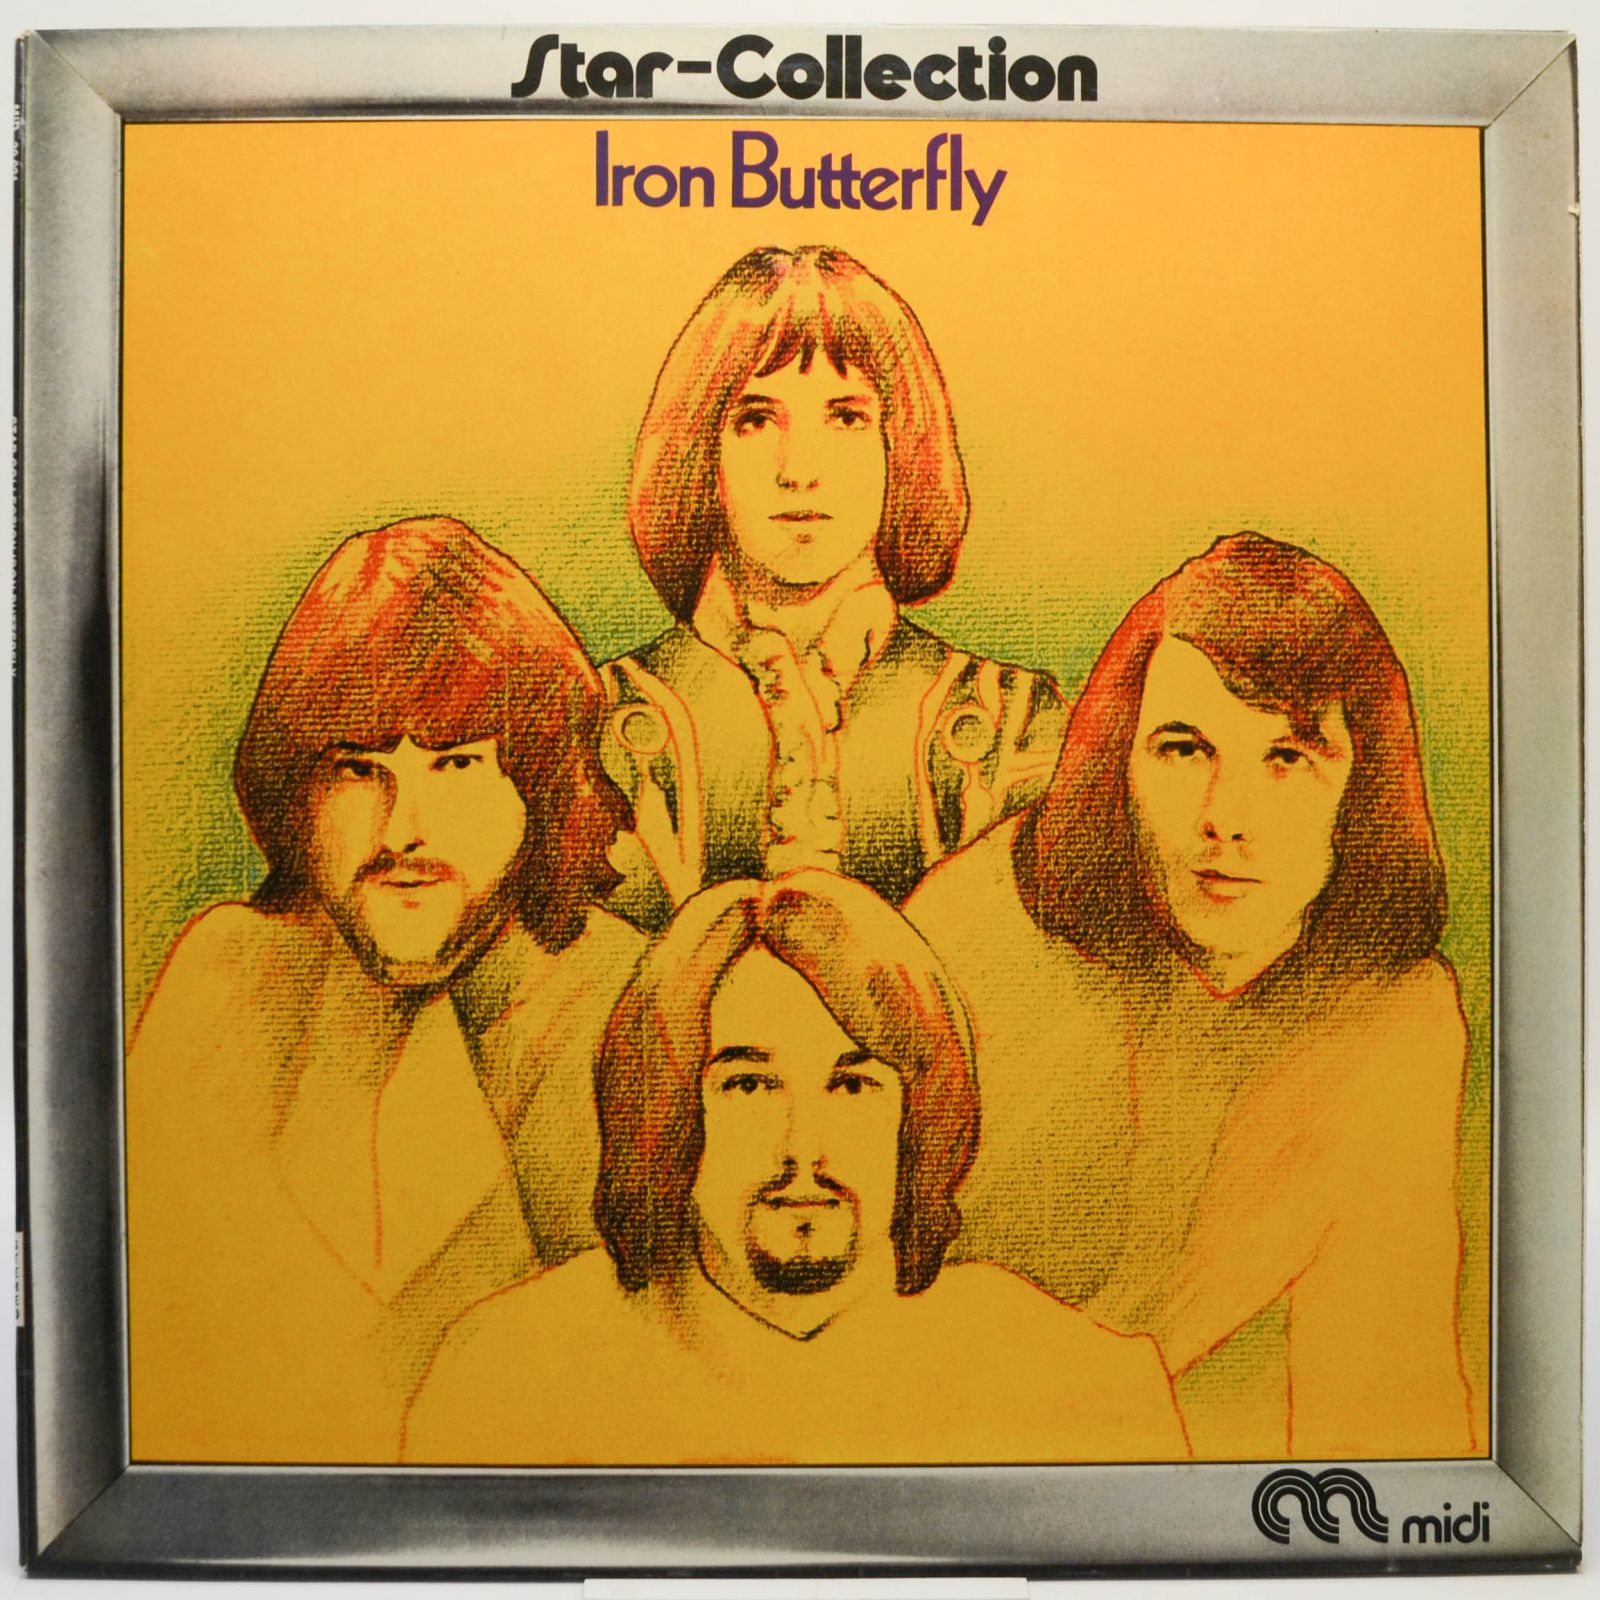 Star-Collection, 1972